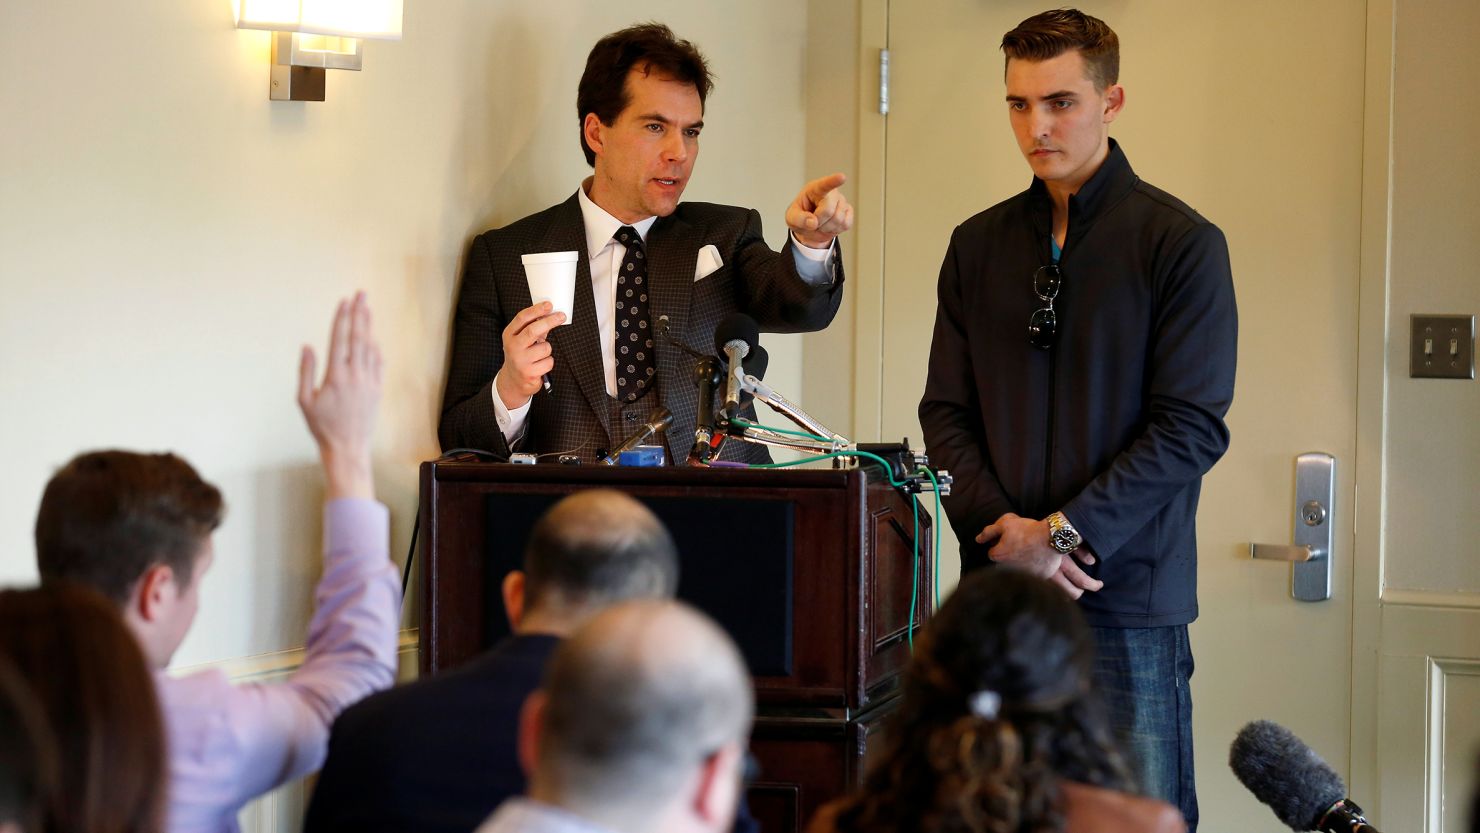 In this November 2018 photo, Jack Burkman, a lawyer and Republican operative, and Jacob Wohl, an internet activist and supporter of then-President Donald Trump, speak during a news conference on their allegations against Special Counsel Robert Mueller in Arlington, Virginia. 